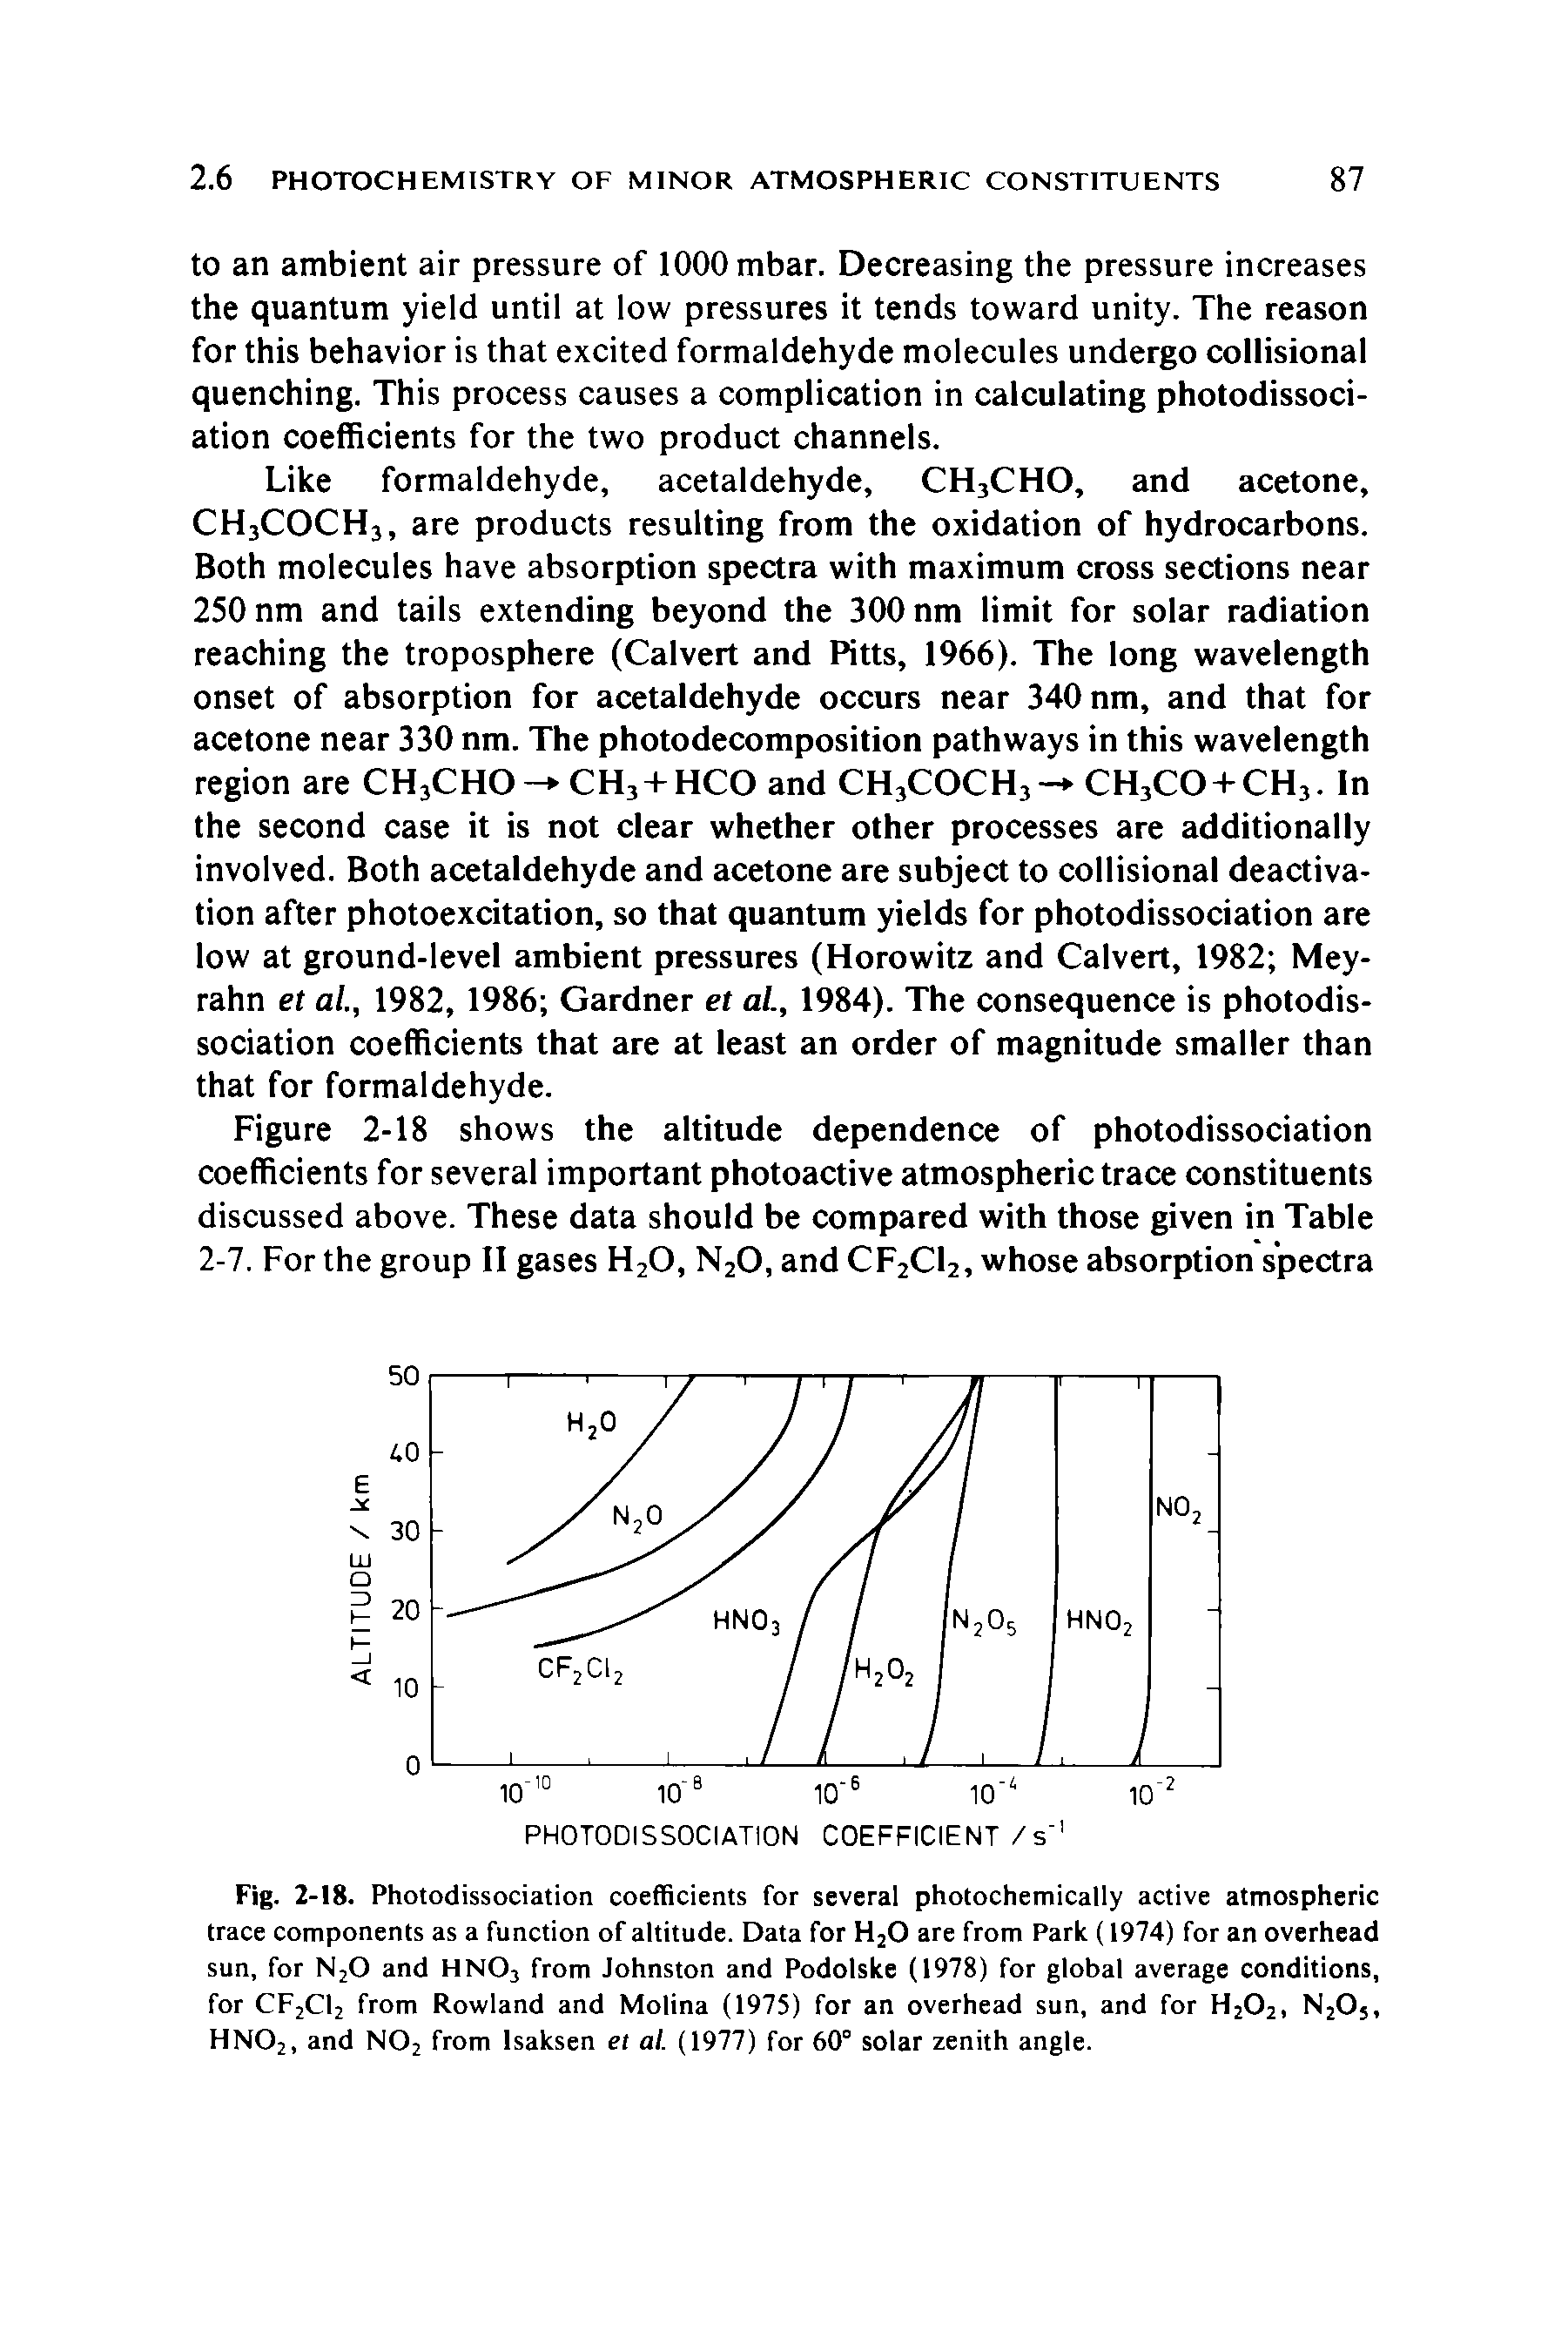 Fig. 2-18. Photodissociation coefficients for several photochemically active atmospheric trace components as a function of altitude. Data for H20 are from Park (1974) for an overhead sun, for N20 and HNOj from Johnston and Podolske (1978) for global average conditions, for CF2C12 from Rowland and Molina (1975) for an overhead sun, and for H202, N205, HN02, and N02 from lsaksen et al. (1977) for 60° solar zenith angle.